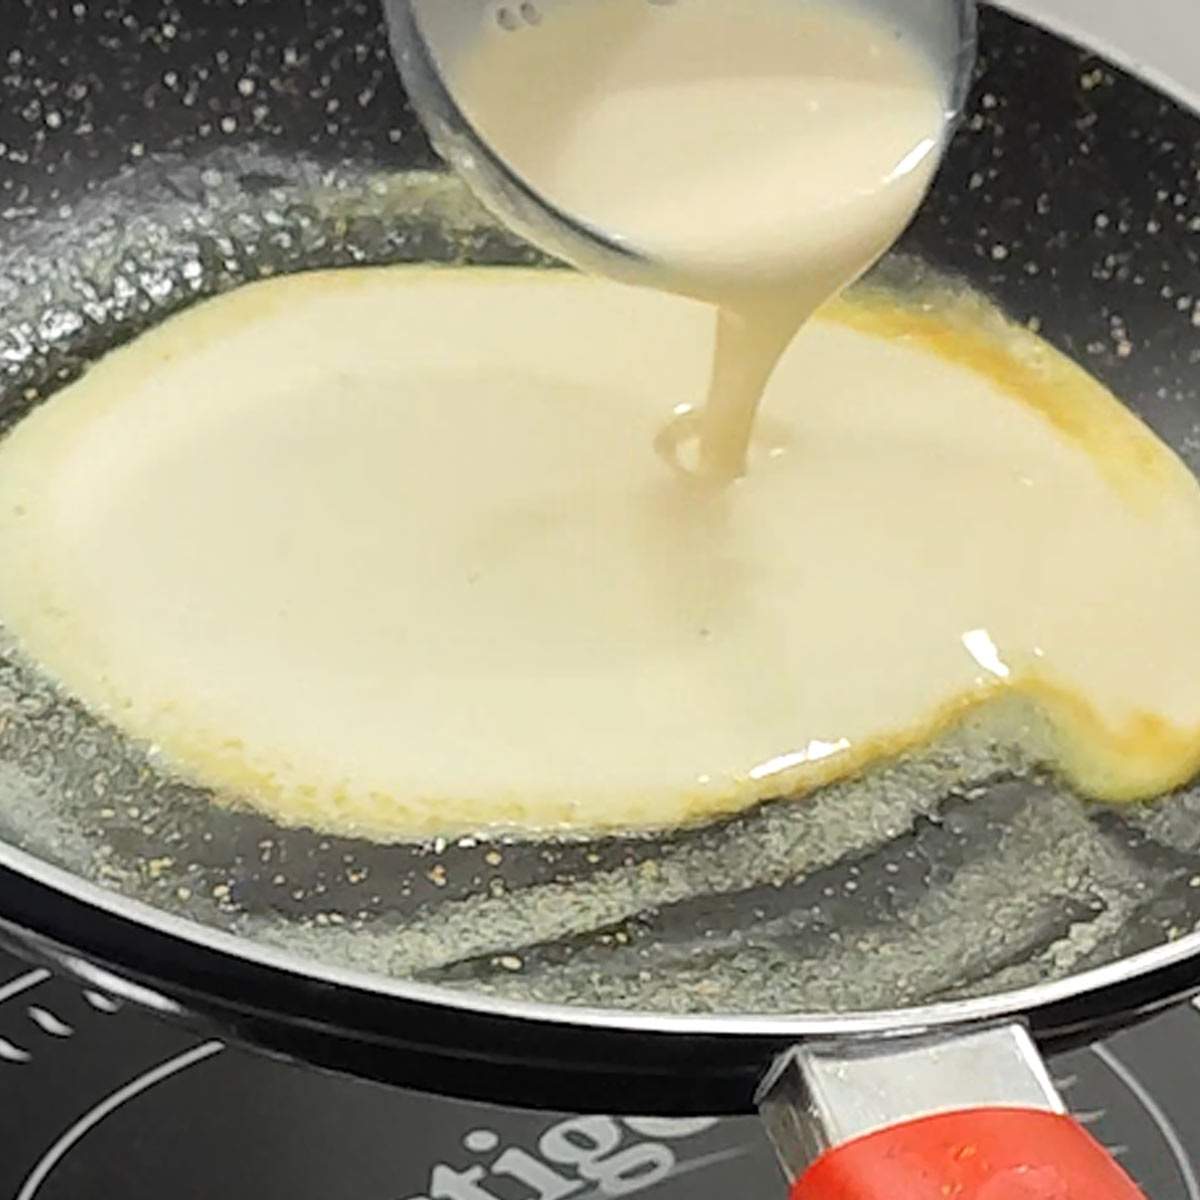 pour crepe batter into the hot skillet